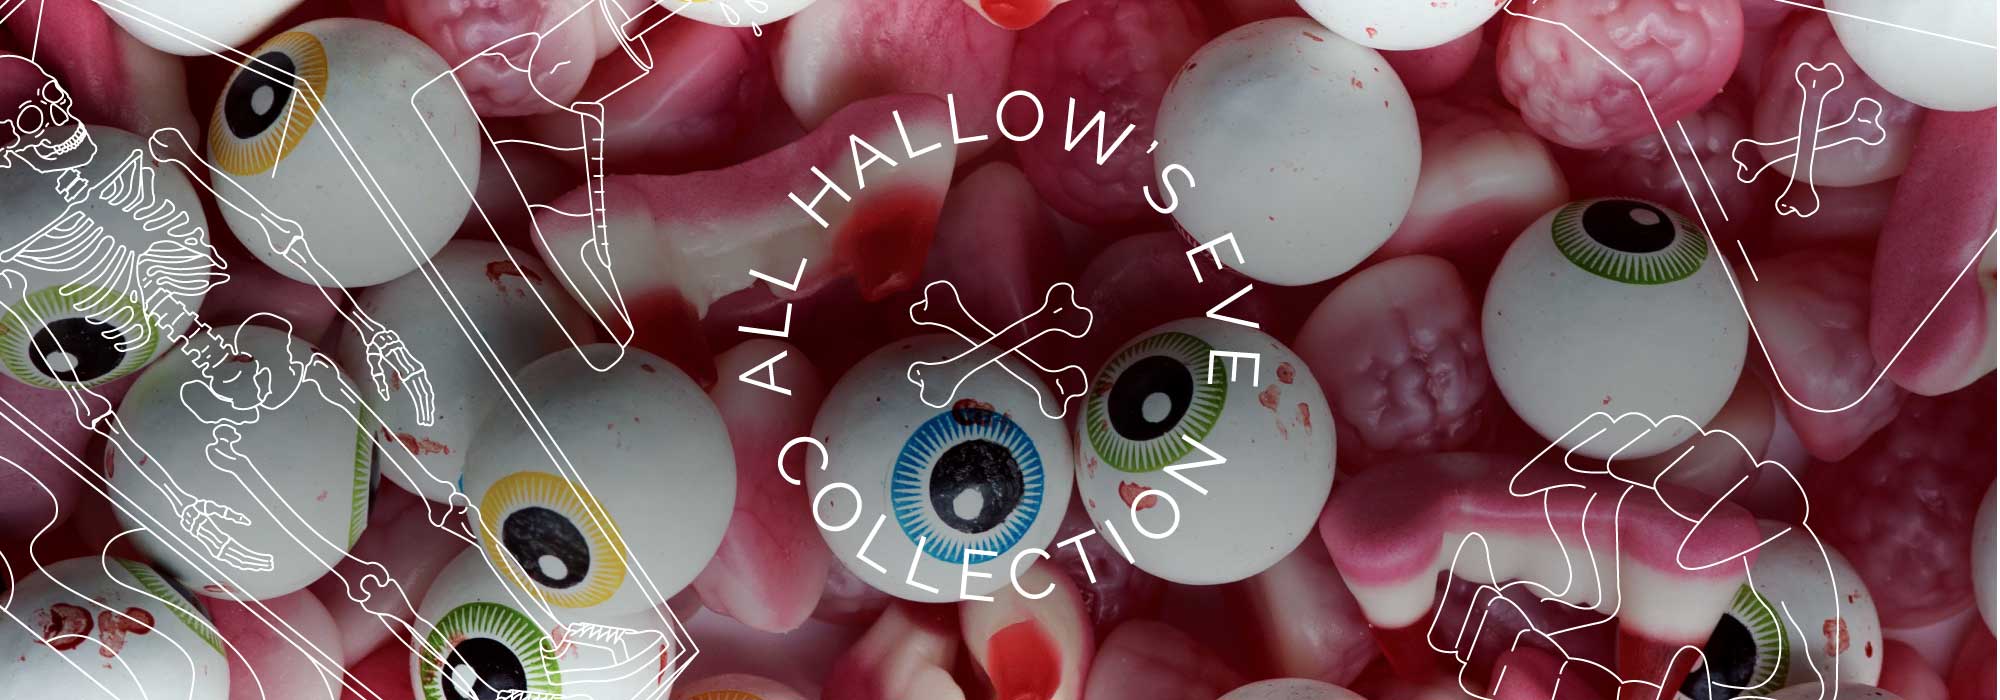 Sneaker LAB Drops the Exclusive 'All Hallows' Eve' Collection